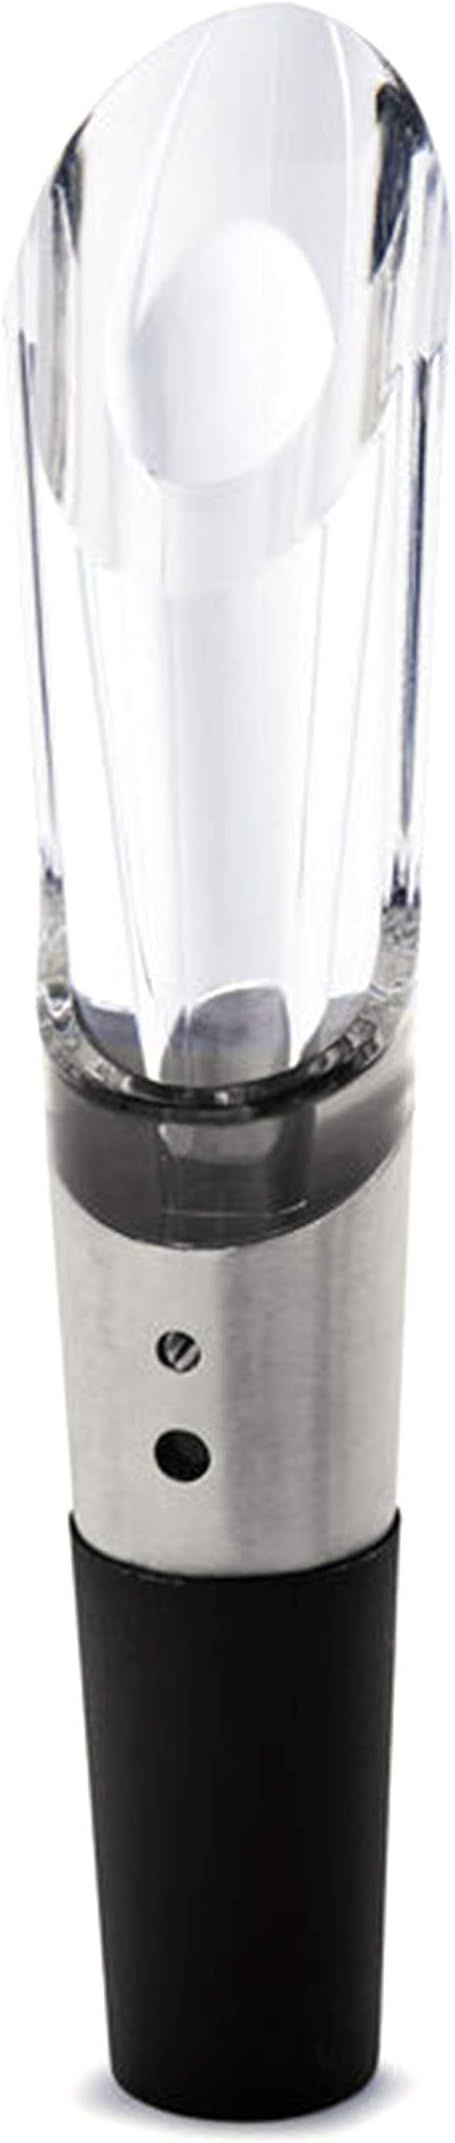 Rabbit Wine Aerator and Pourer, 1.1 x 1.1 x 5.2 inches, Clear/Stainless Steel | Amazon (US)